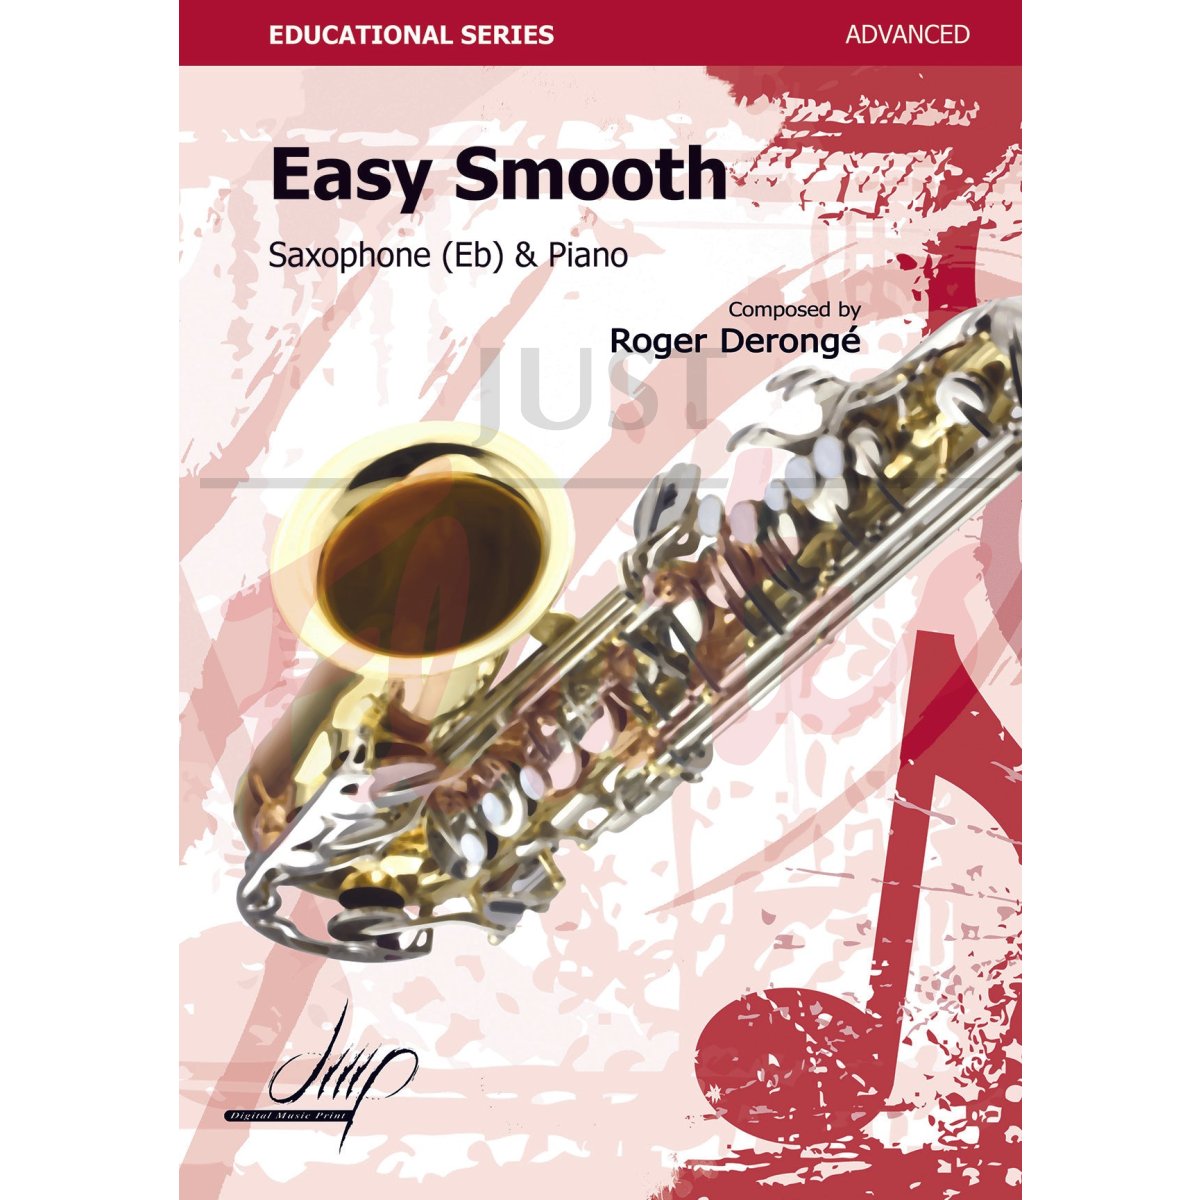 Easy Smooth for Alto Saxophone and Piano